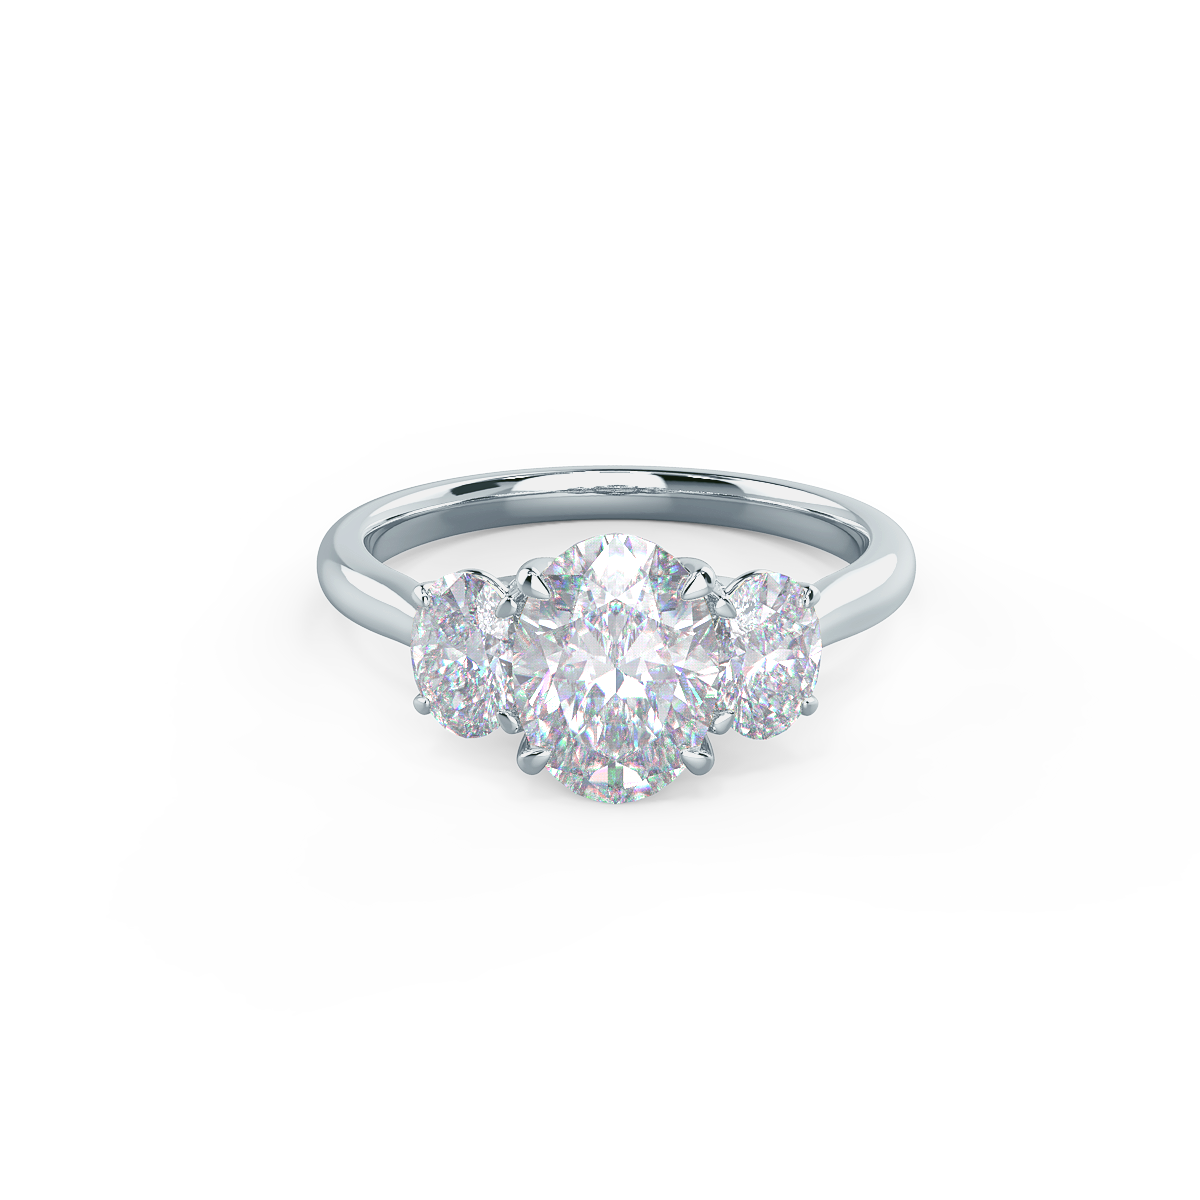 Details about   Classic Three Stone 1.25 Ct Oval Cut Diamond Engagement Ring 14K White Gold Over 